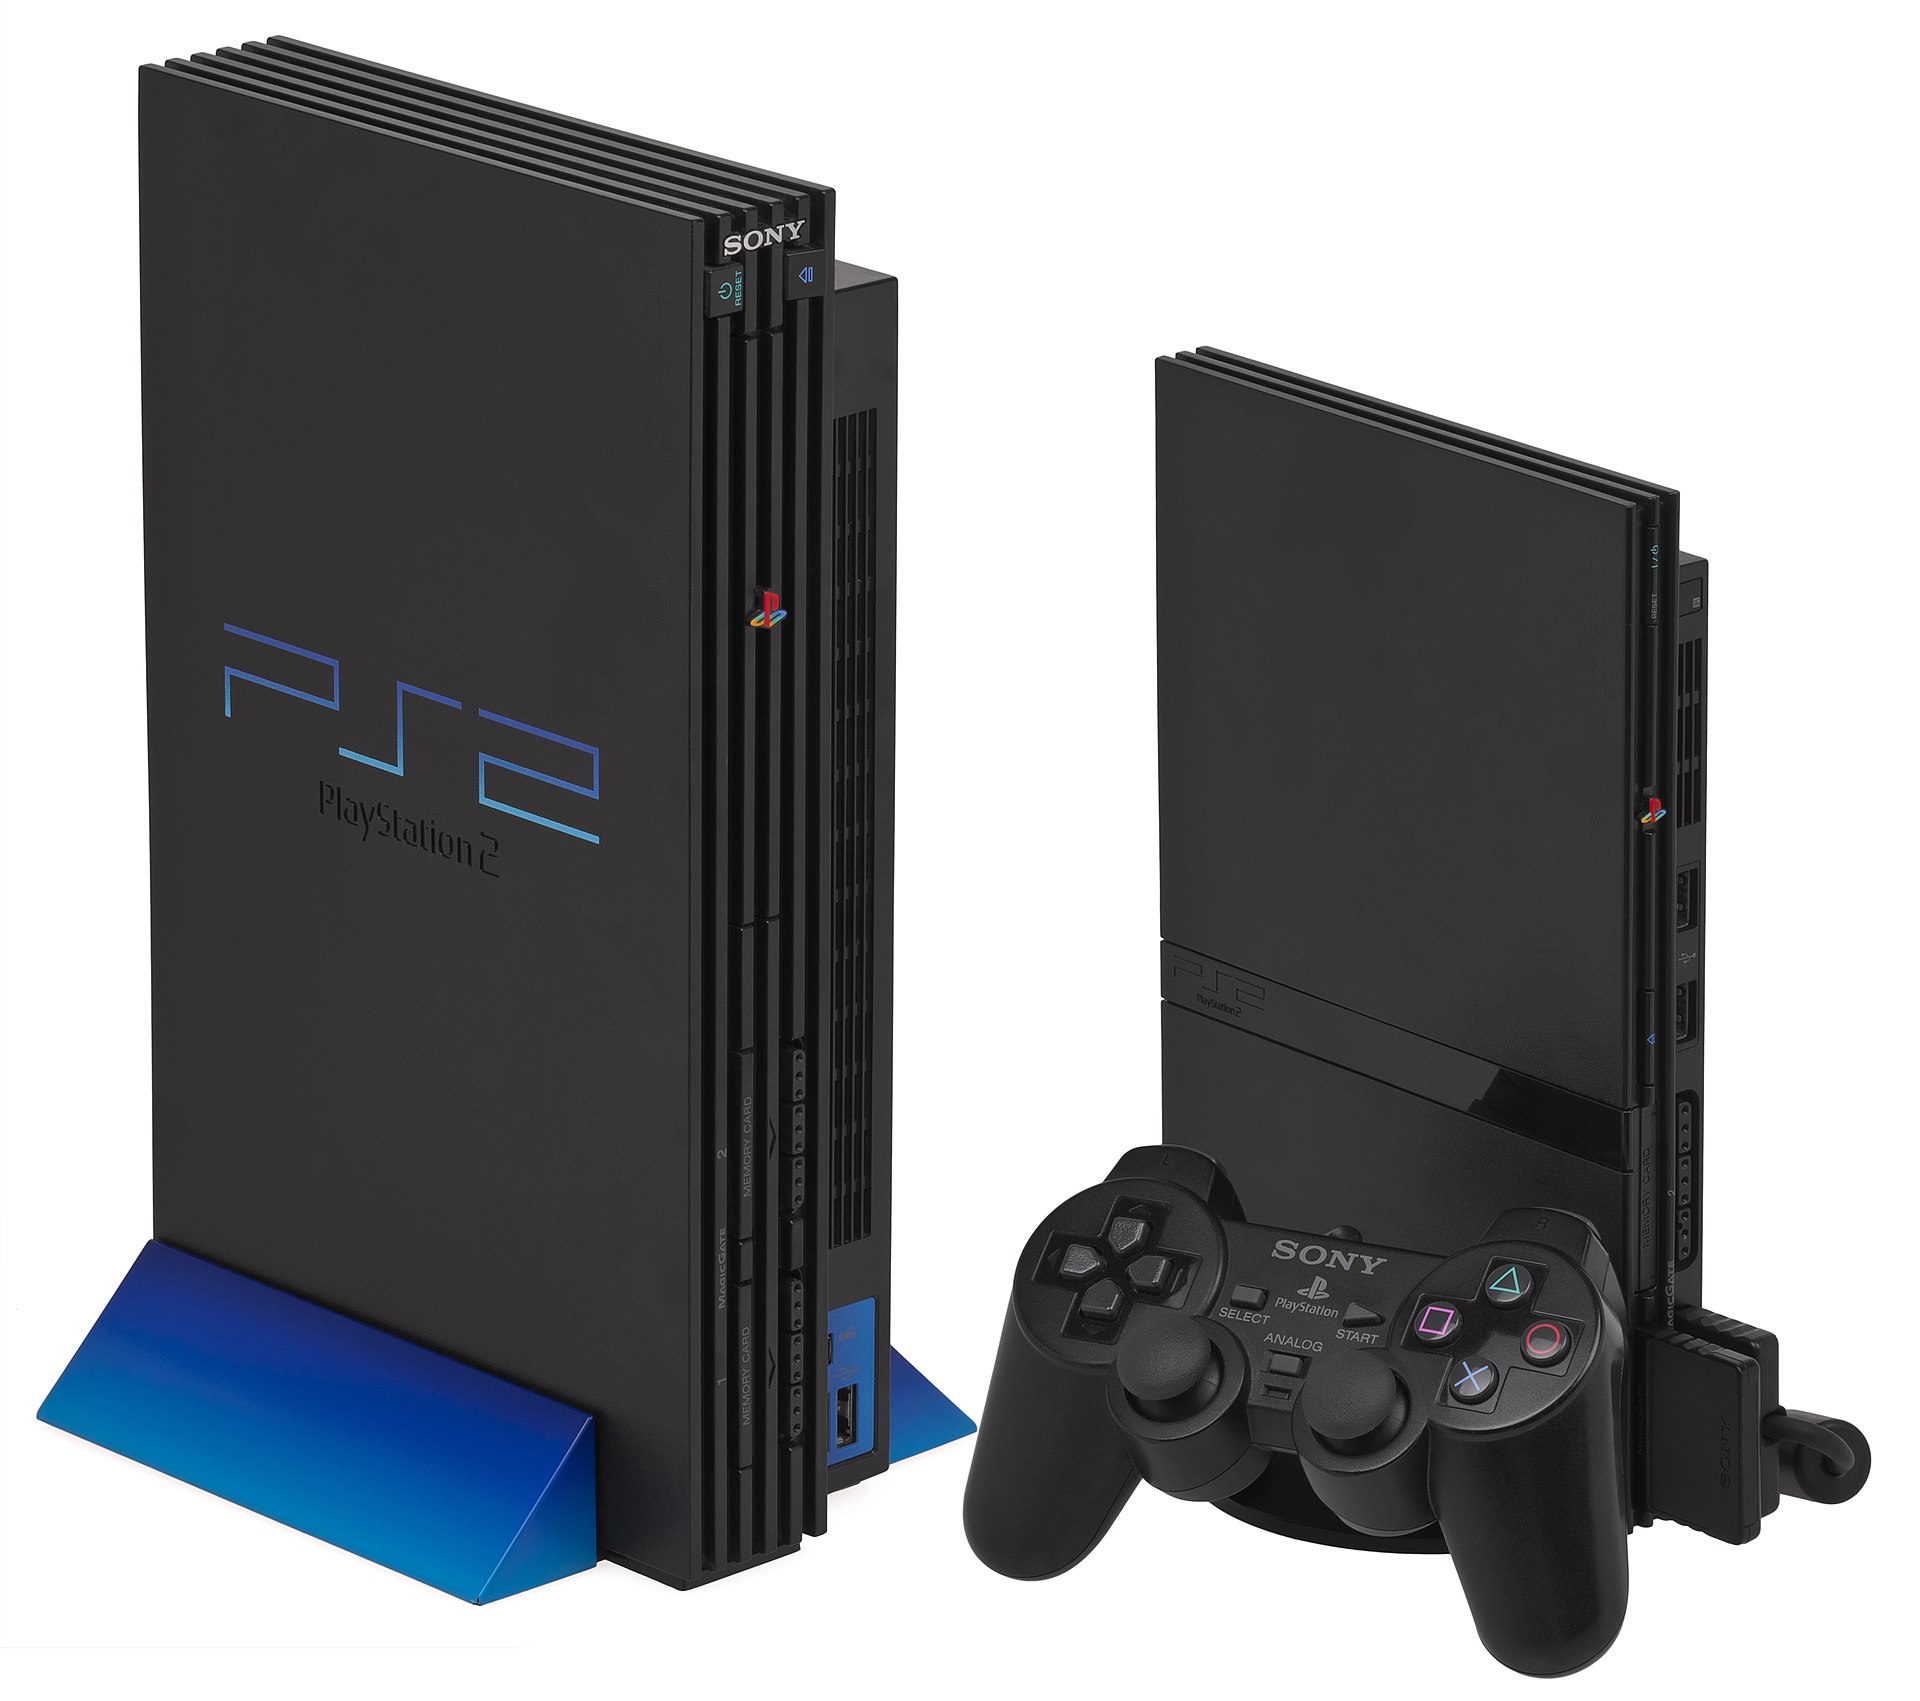 sony_playstation2_s_part2 directory listing